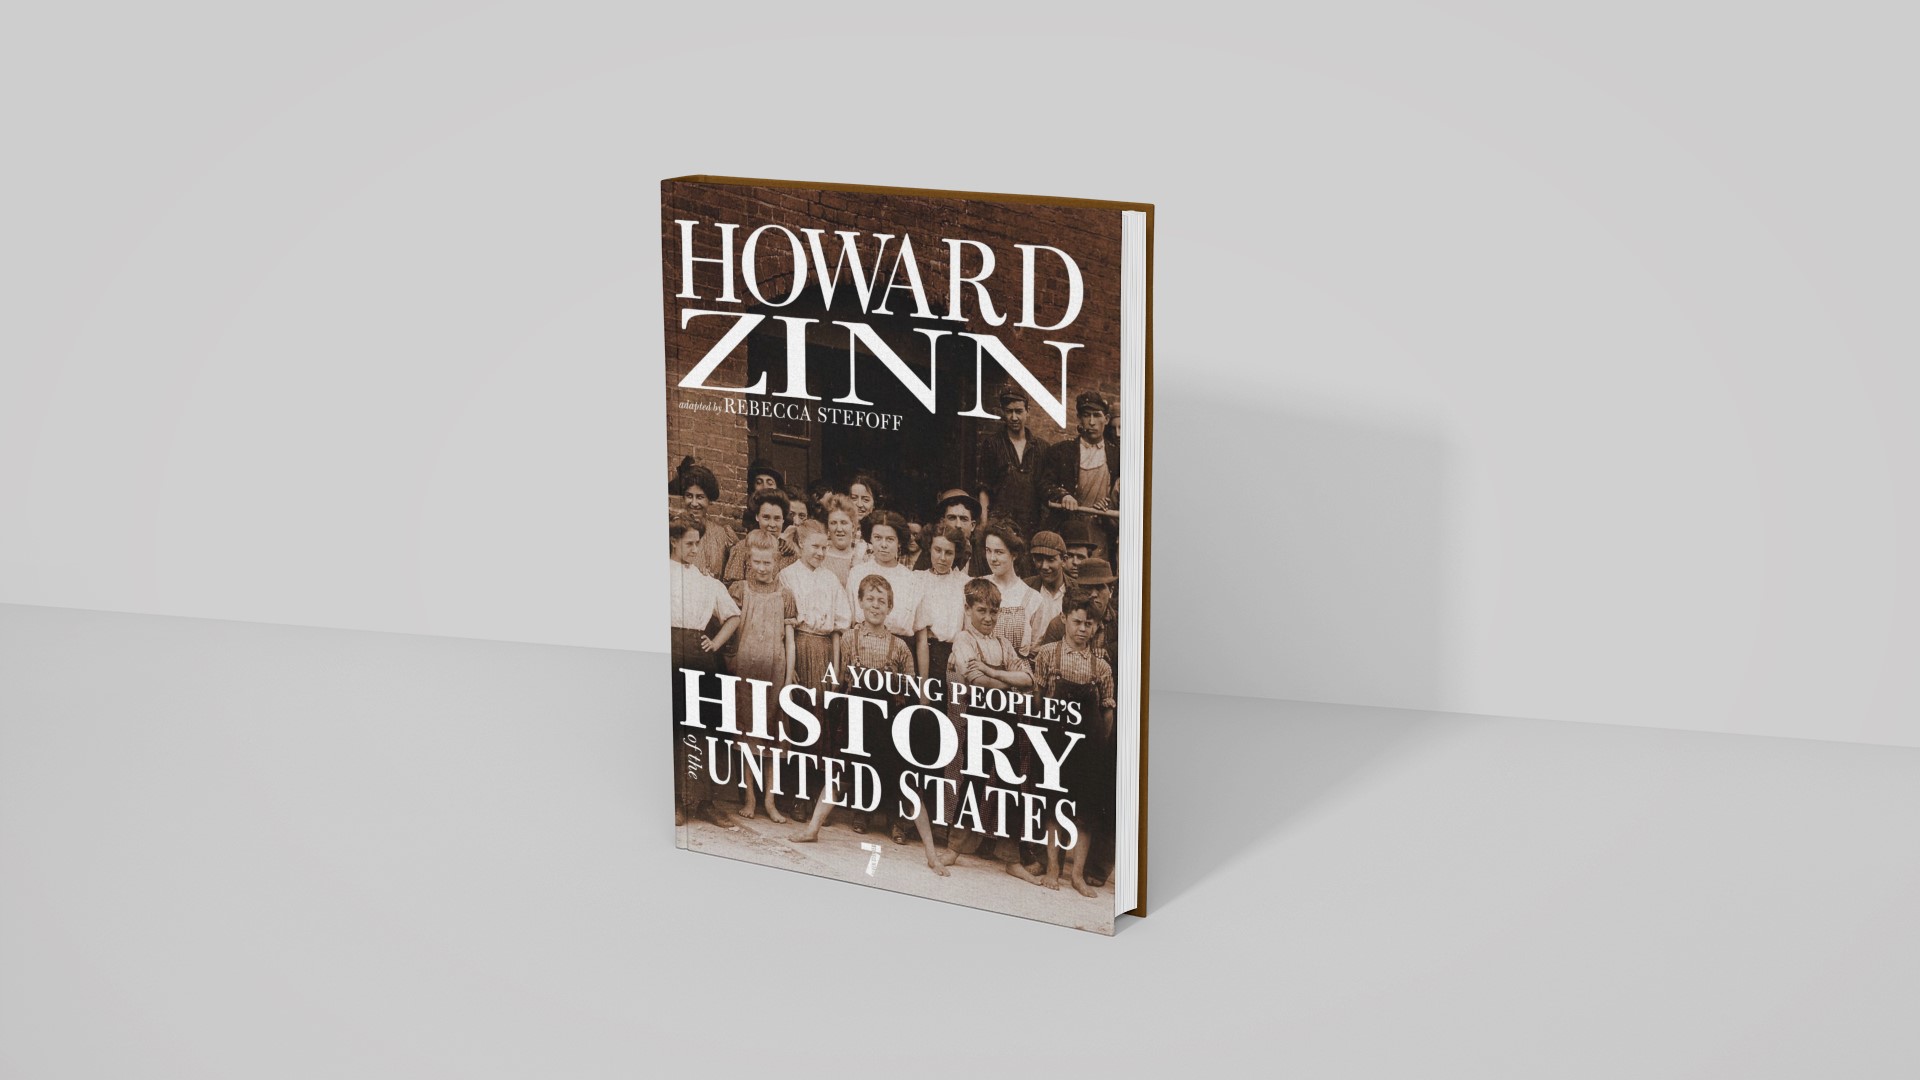 A People’s History of the United States - Howard Zinn